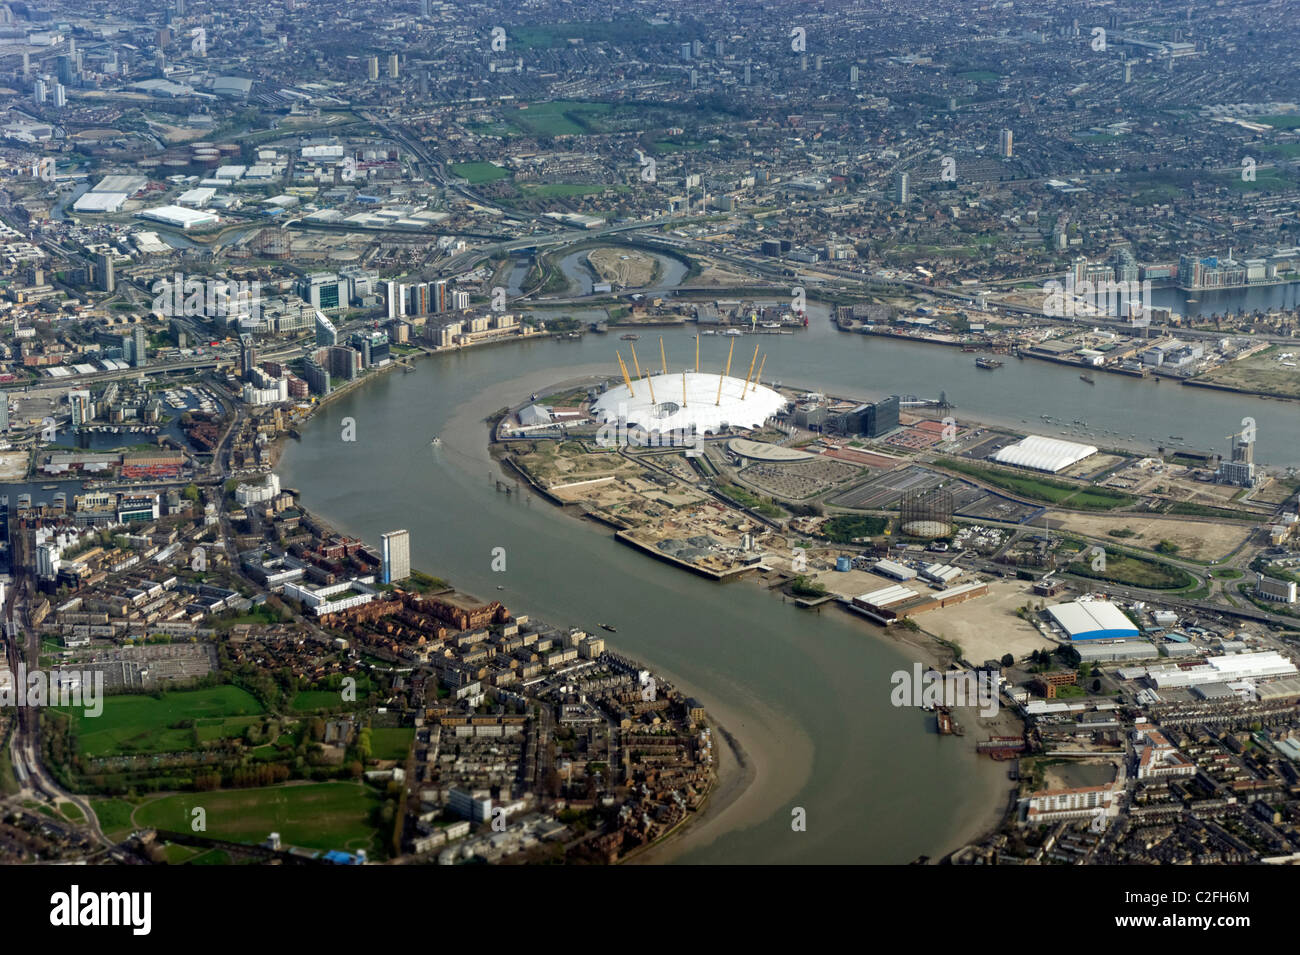 Aerial view of the O2 Concert Arena (a.k.a. Millennium Dome) and the Thames river in London, England, UK Stock Photo